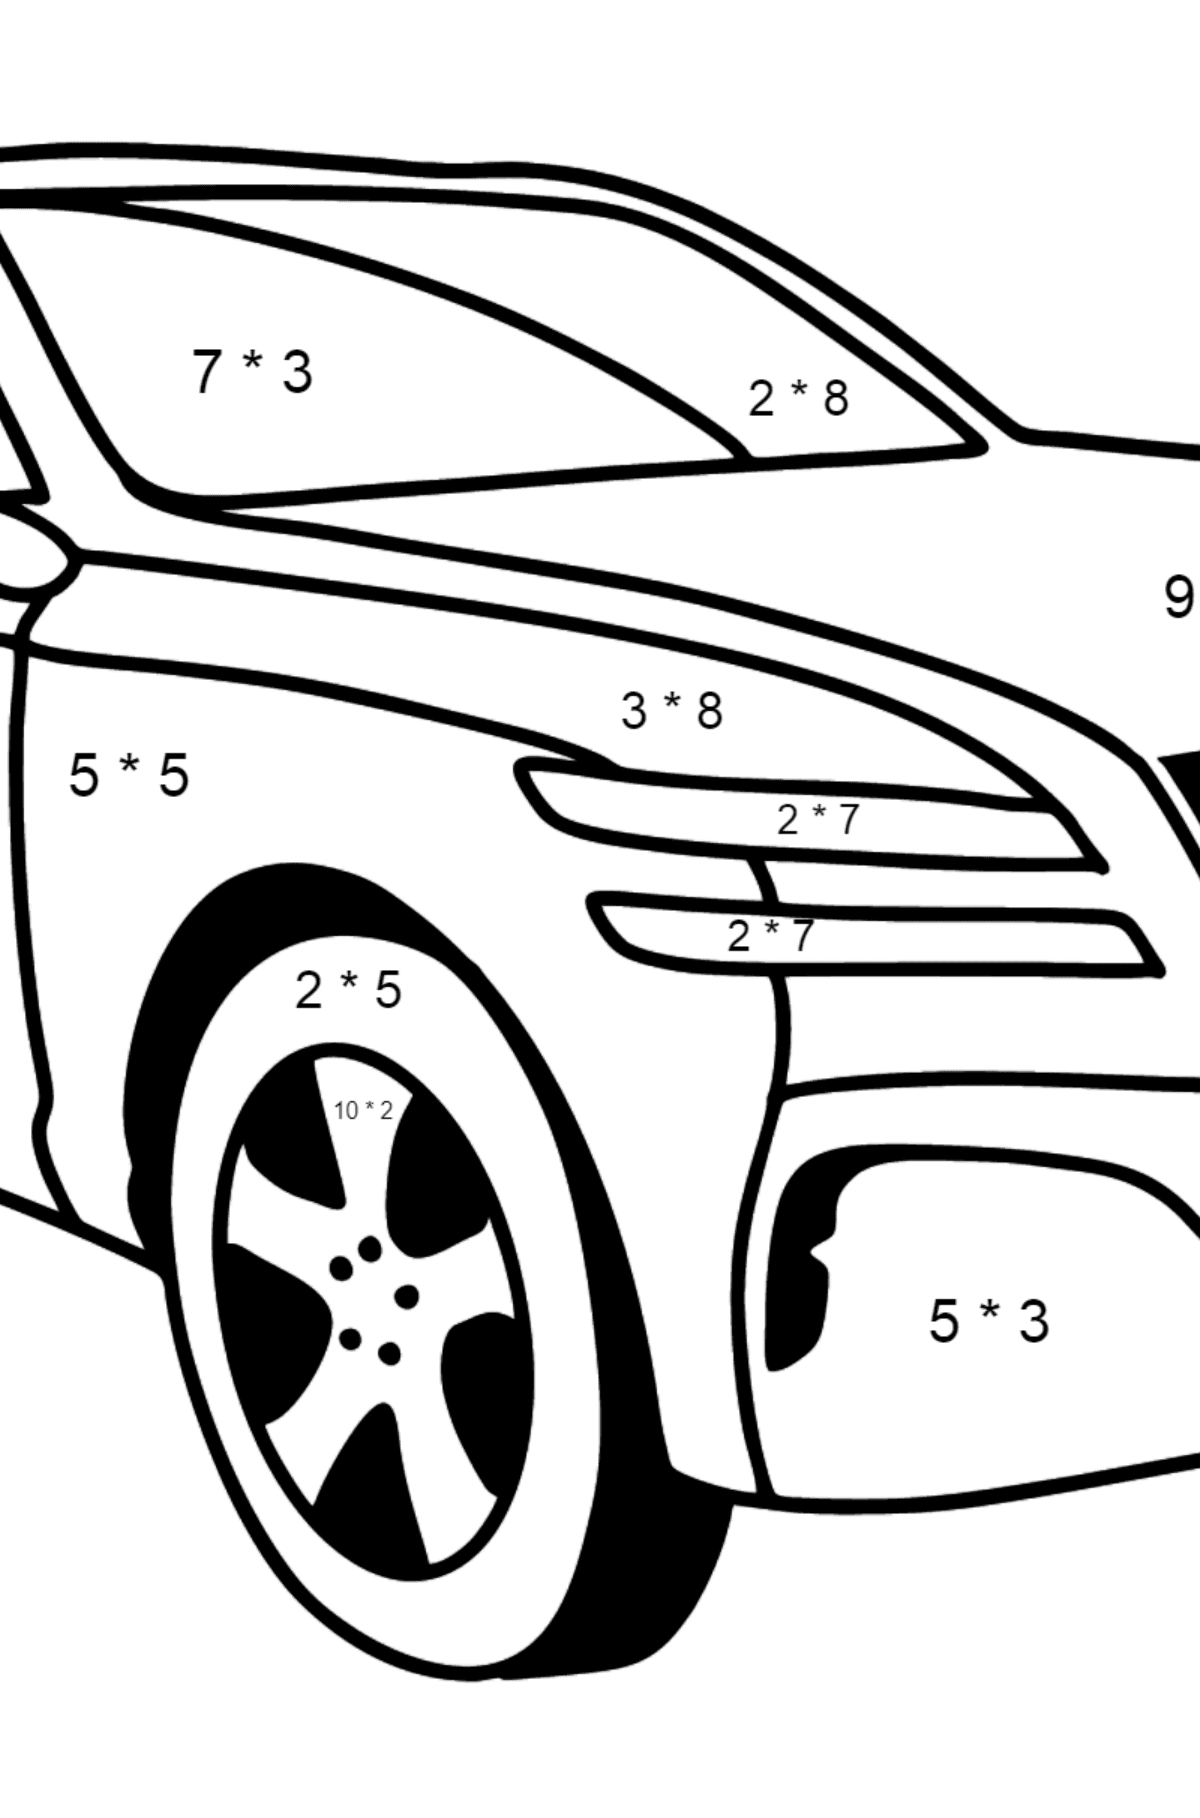 Genesis car coloring page - Math Coloring - Multiplication for Kids